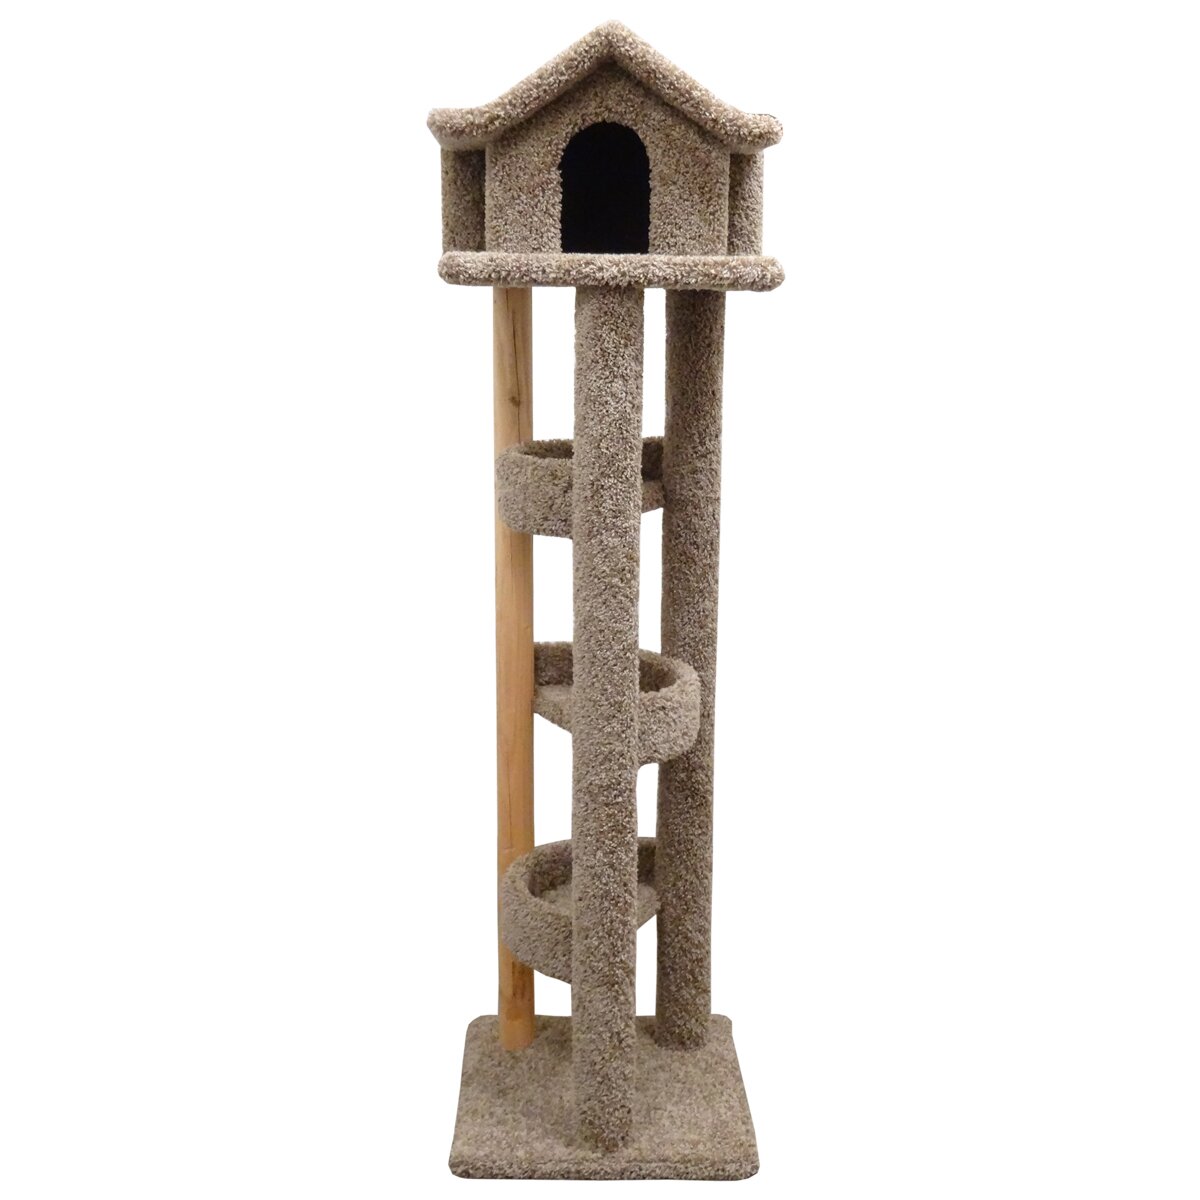 for iphone download Cat Condo free